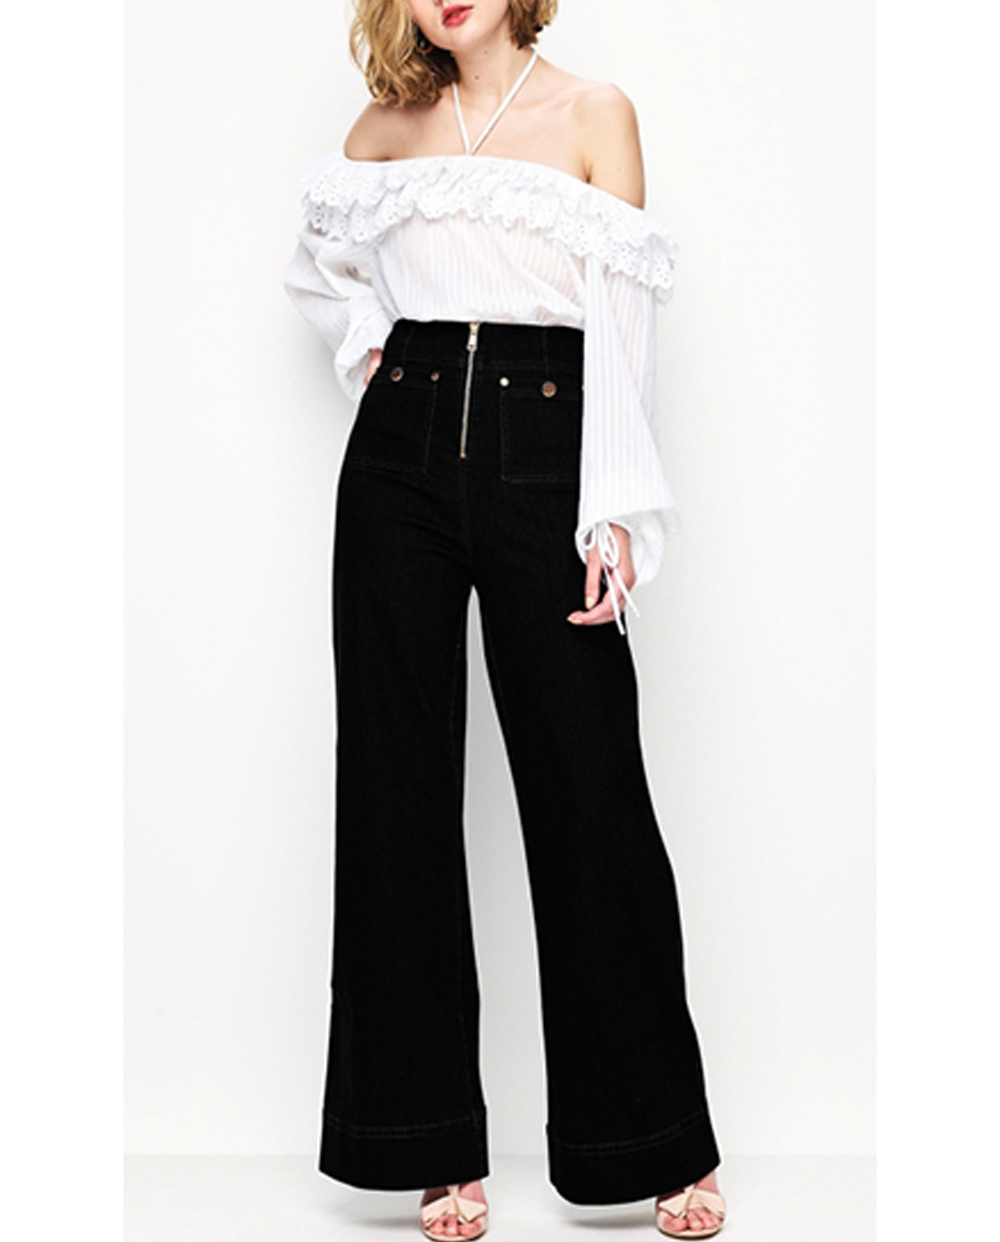 30+ Items We Can't Believe Are On Sale Right Now And We're #AddingToCart | Got Me So Good Top, $95 AUD (was $240 AUD) from Alice McCall